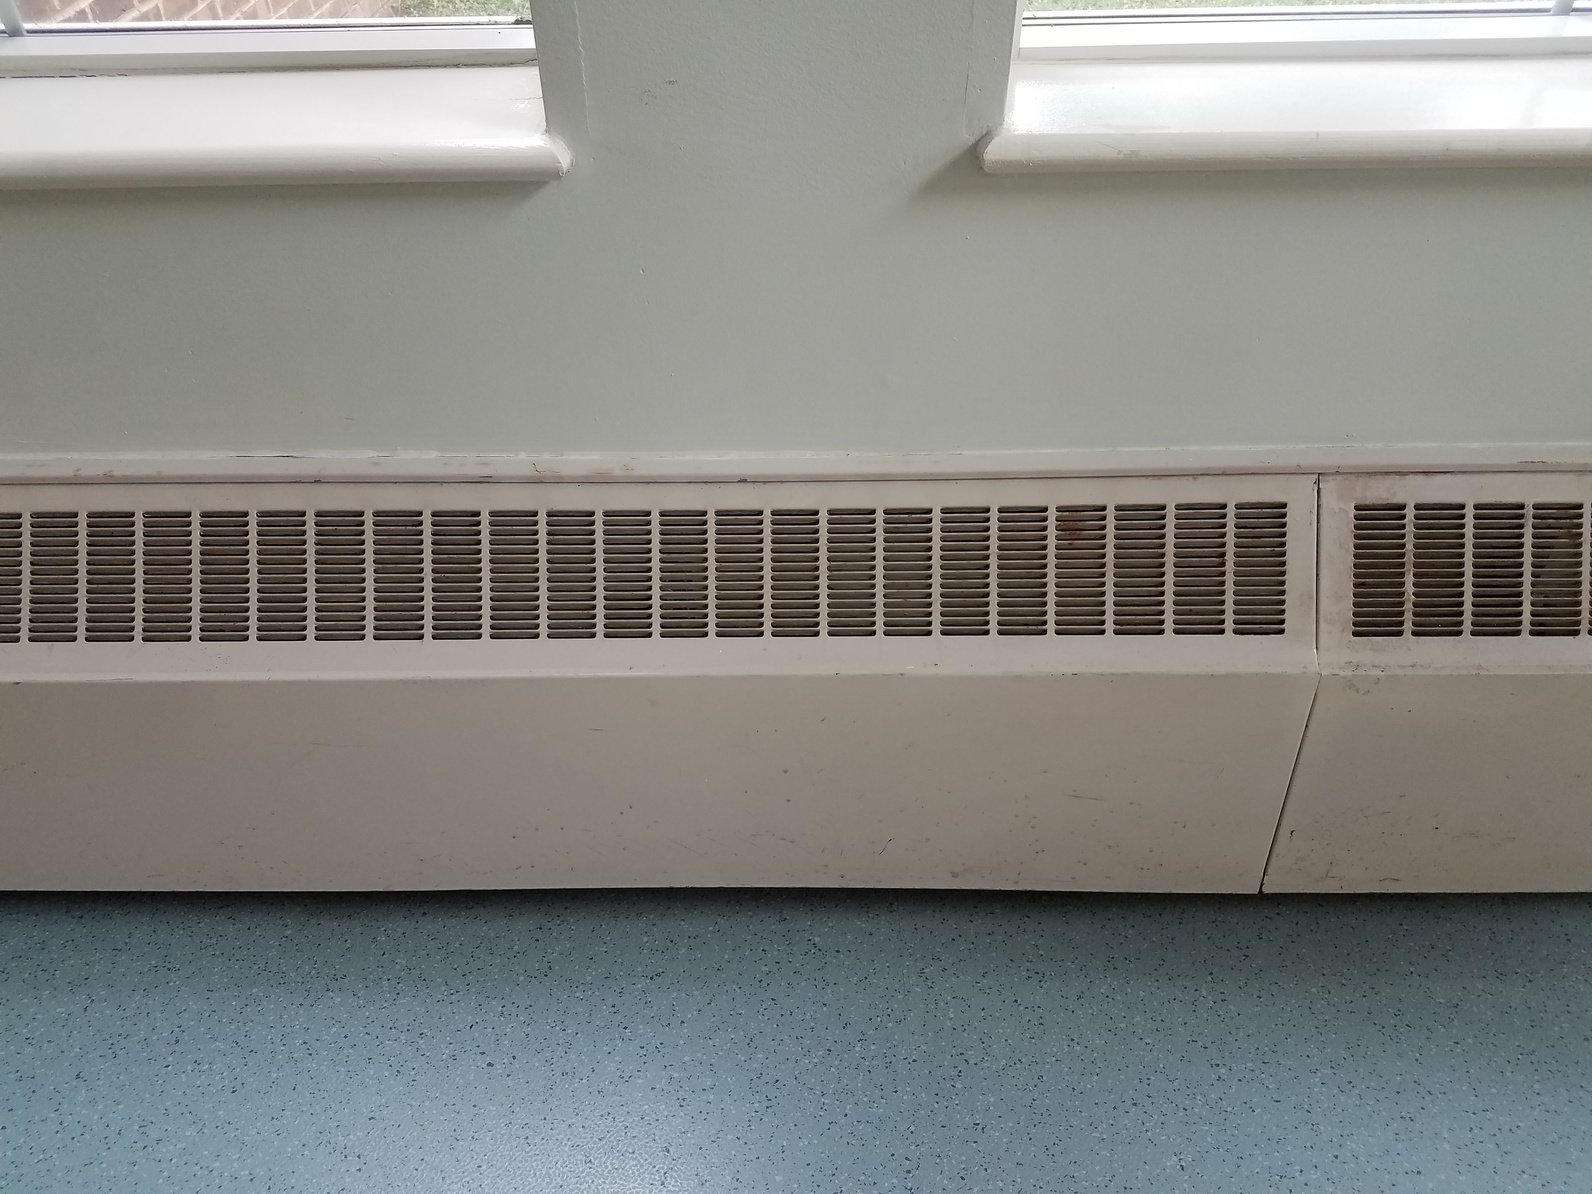 Baseboard electric heating system installed in a home